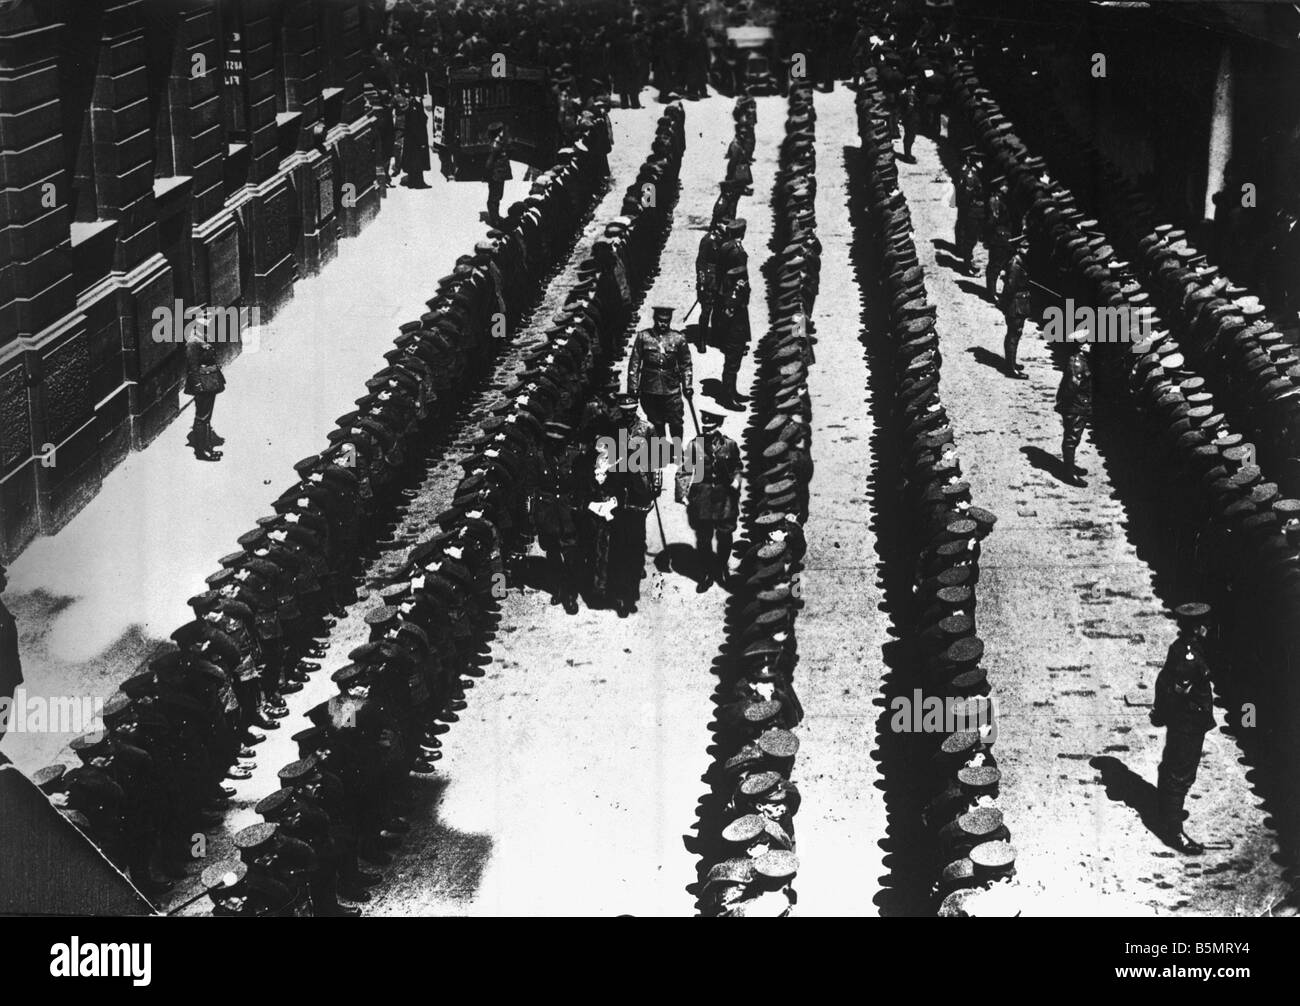 9EN 1914 8 4 A1 E Mobilization in London 1914 World War I Great Britain Entry into the war on 4 August 1914 after the German Emp Stock Photo